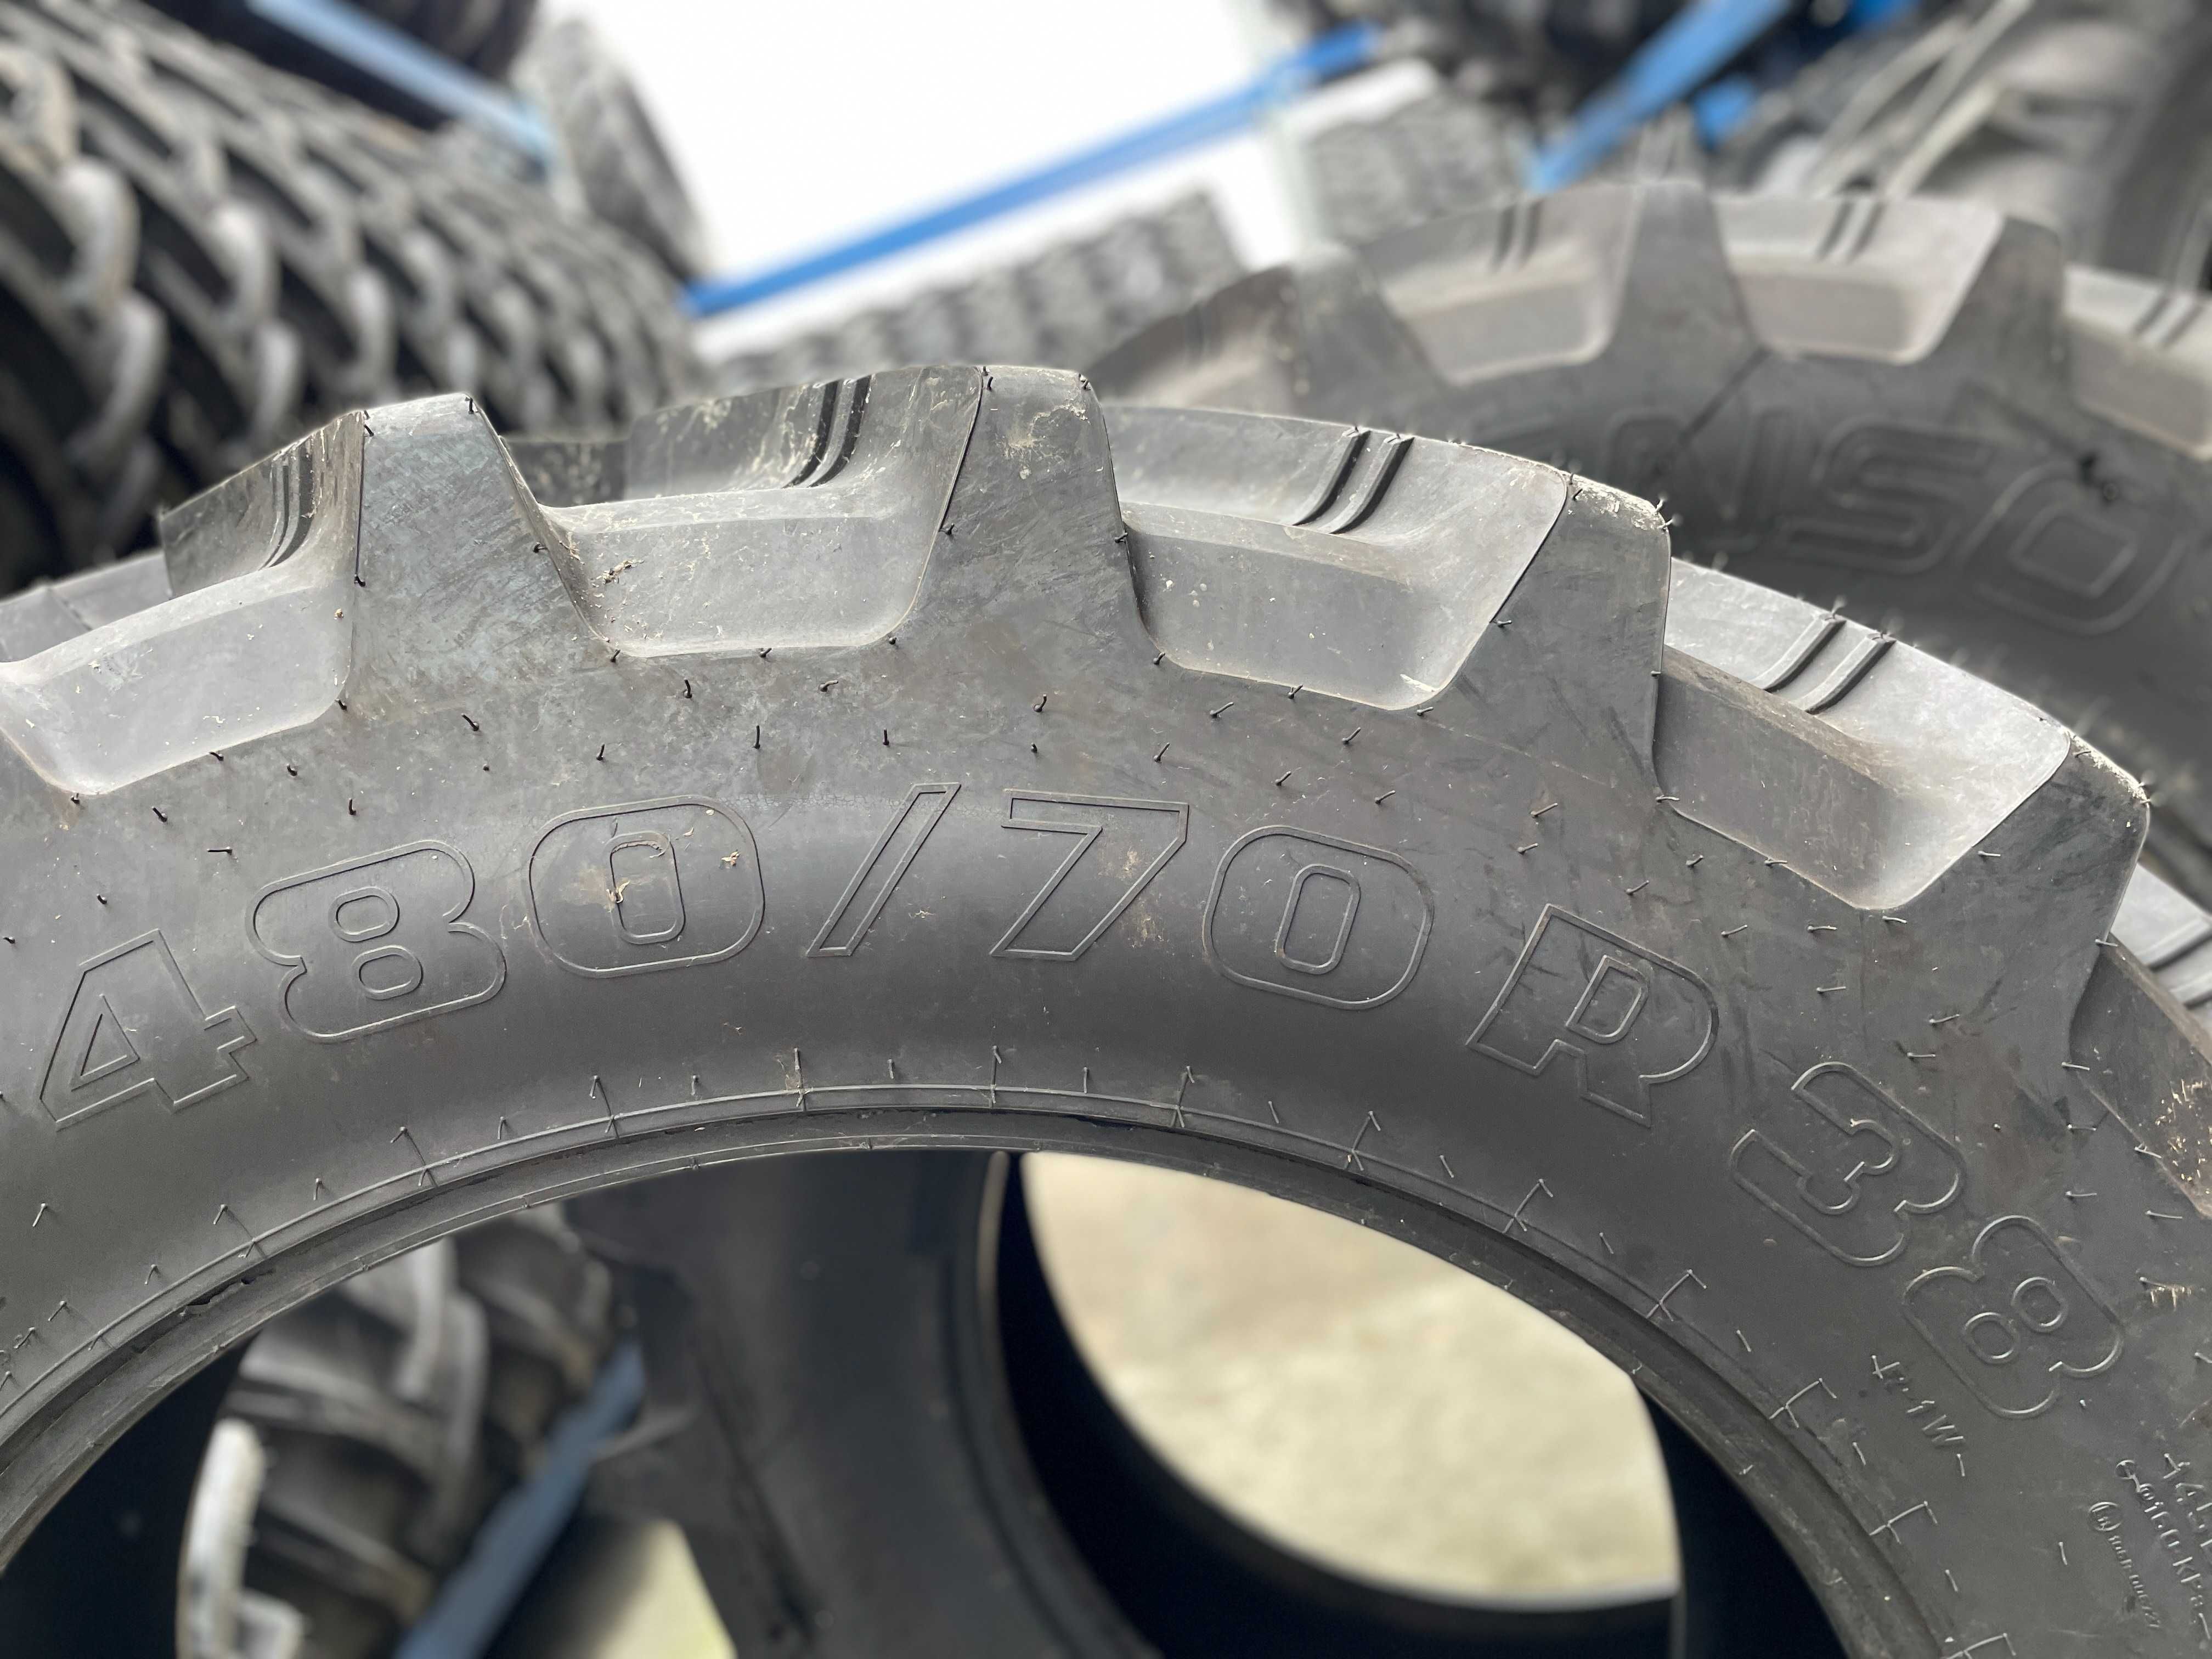 Anvelope noi Radiale de tractor spate 480/70R38 Ascenso